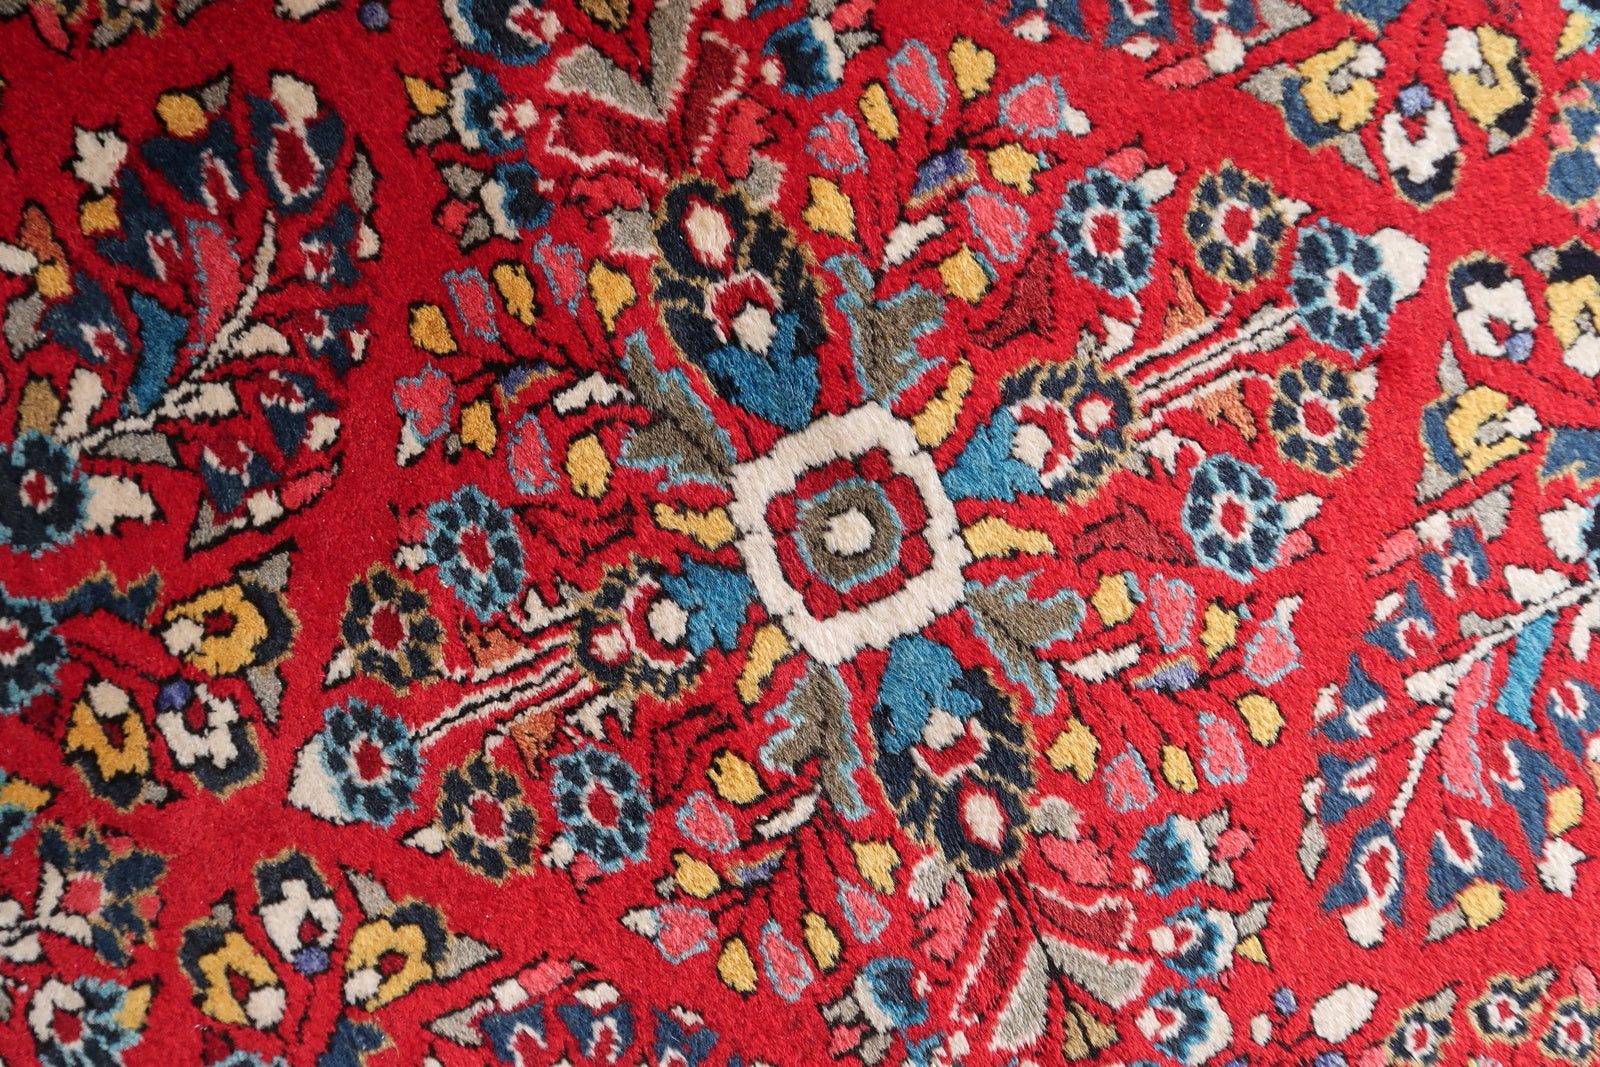 1950s vintage textile with Middle Eastern artistry.